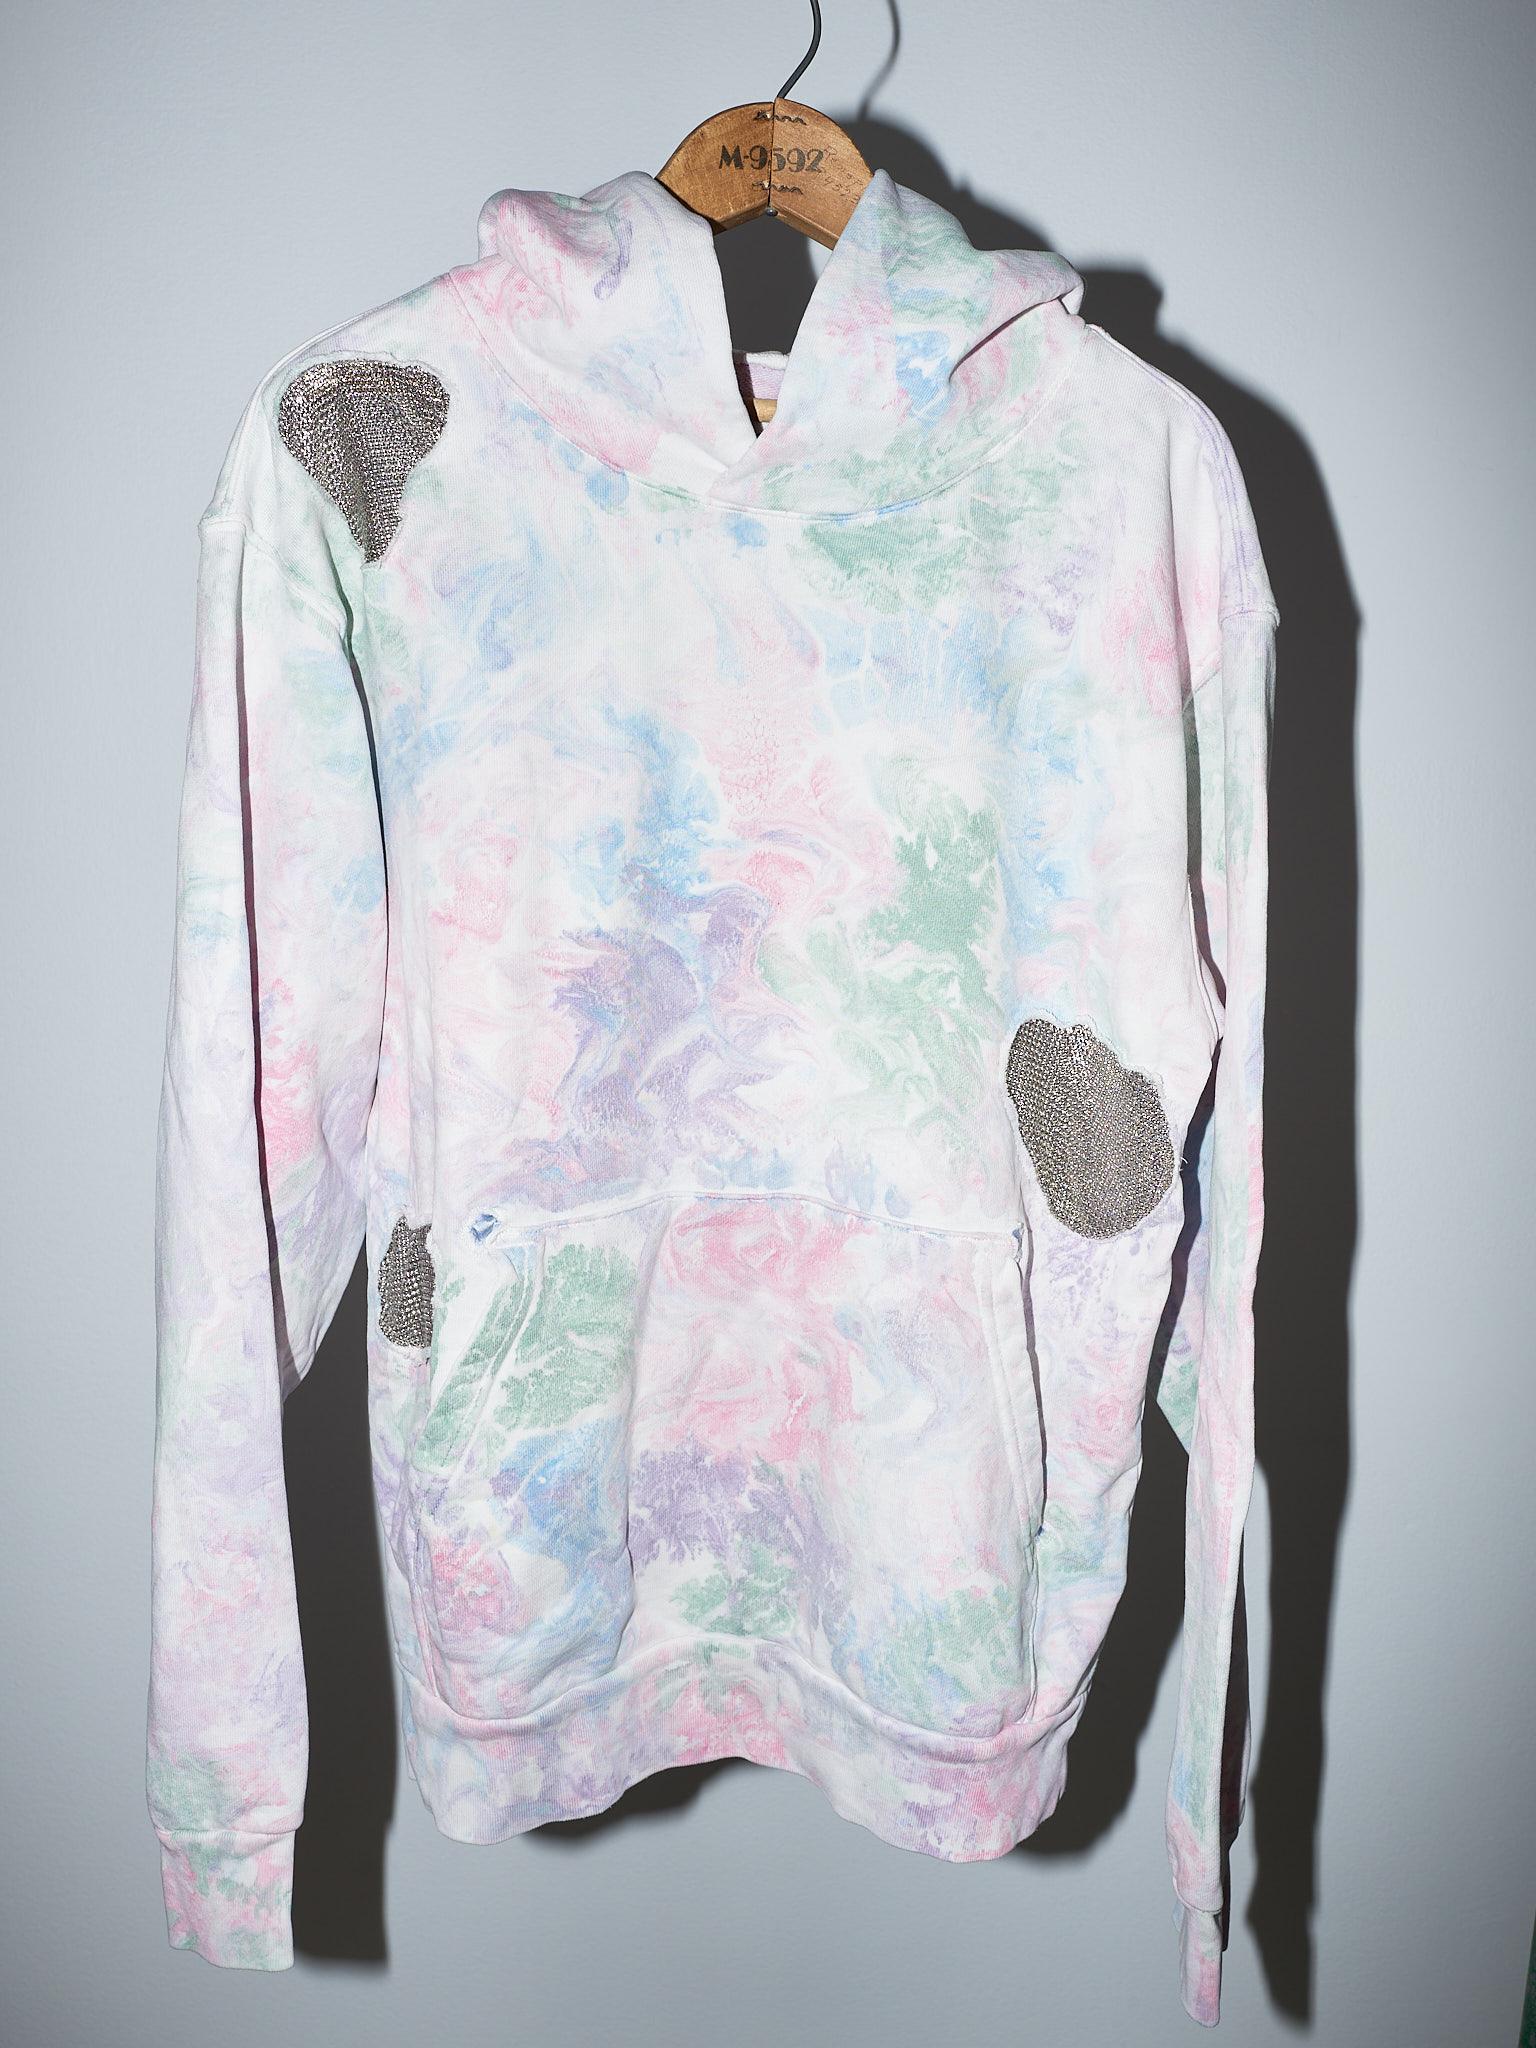 Hoodie Pastel Marble Cotton Embellished Chain Patchwork J Dauphin In New Condition For Sale In Los Angeles, CA